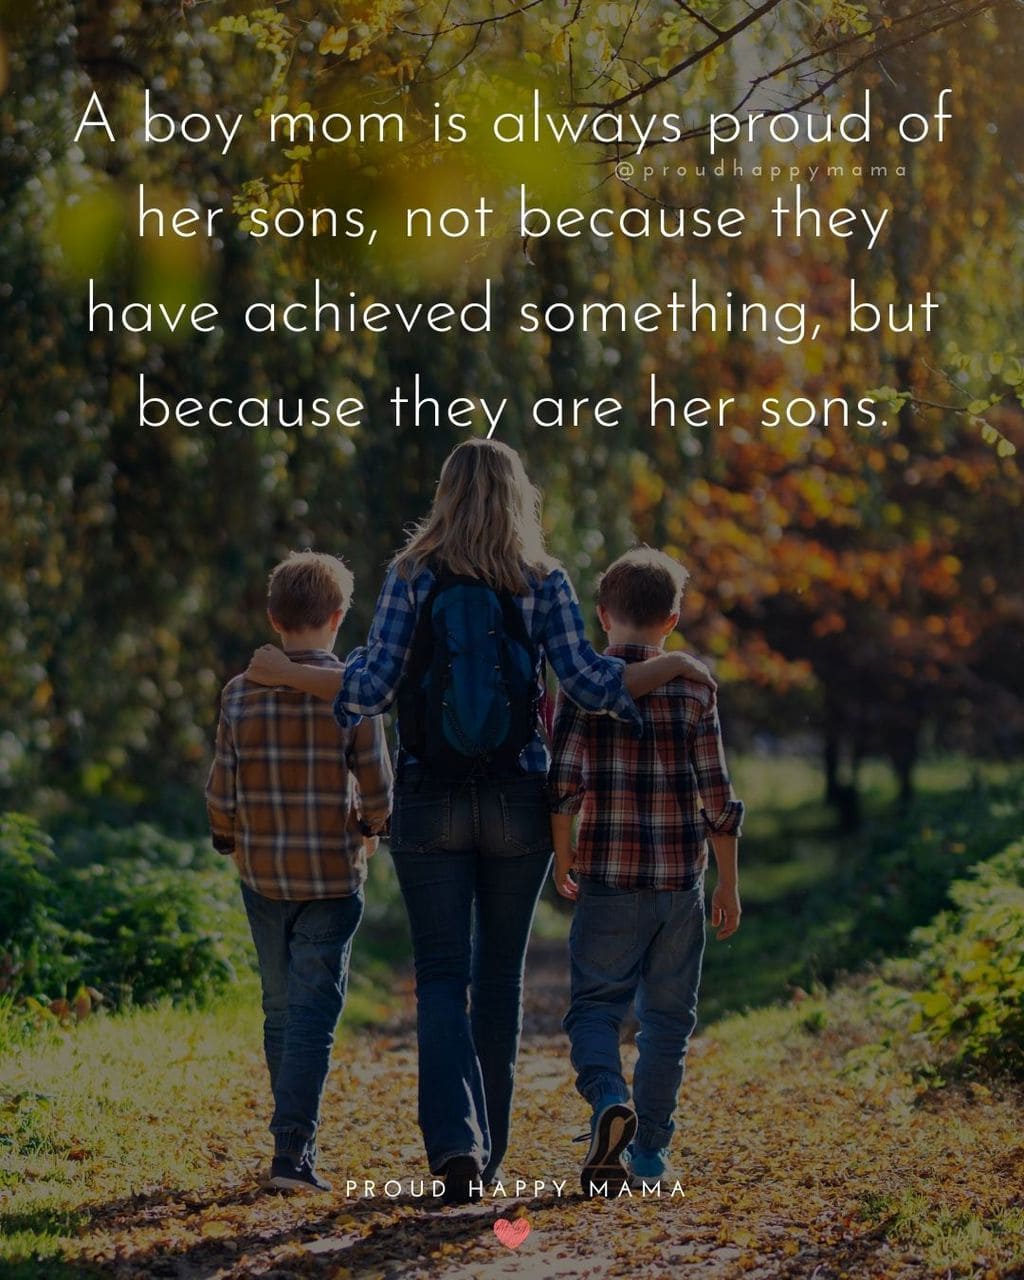 Boy Mom Quotes - A boy mom is always proud of her sons, not because they have achieved something, but because they are her sons.